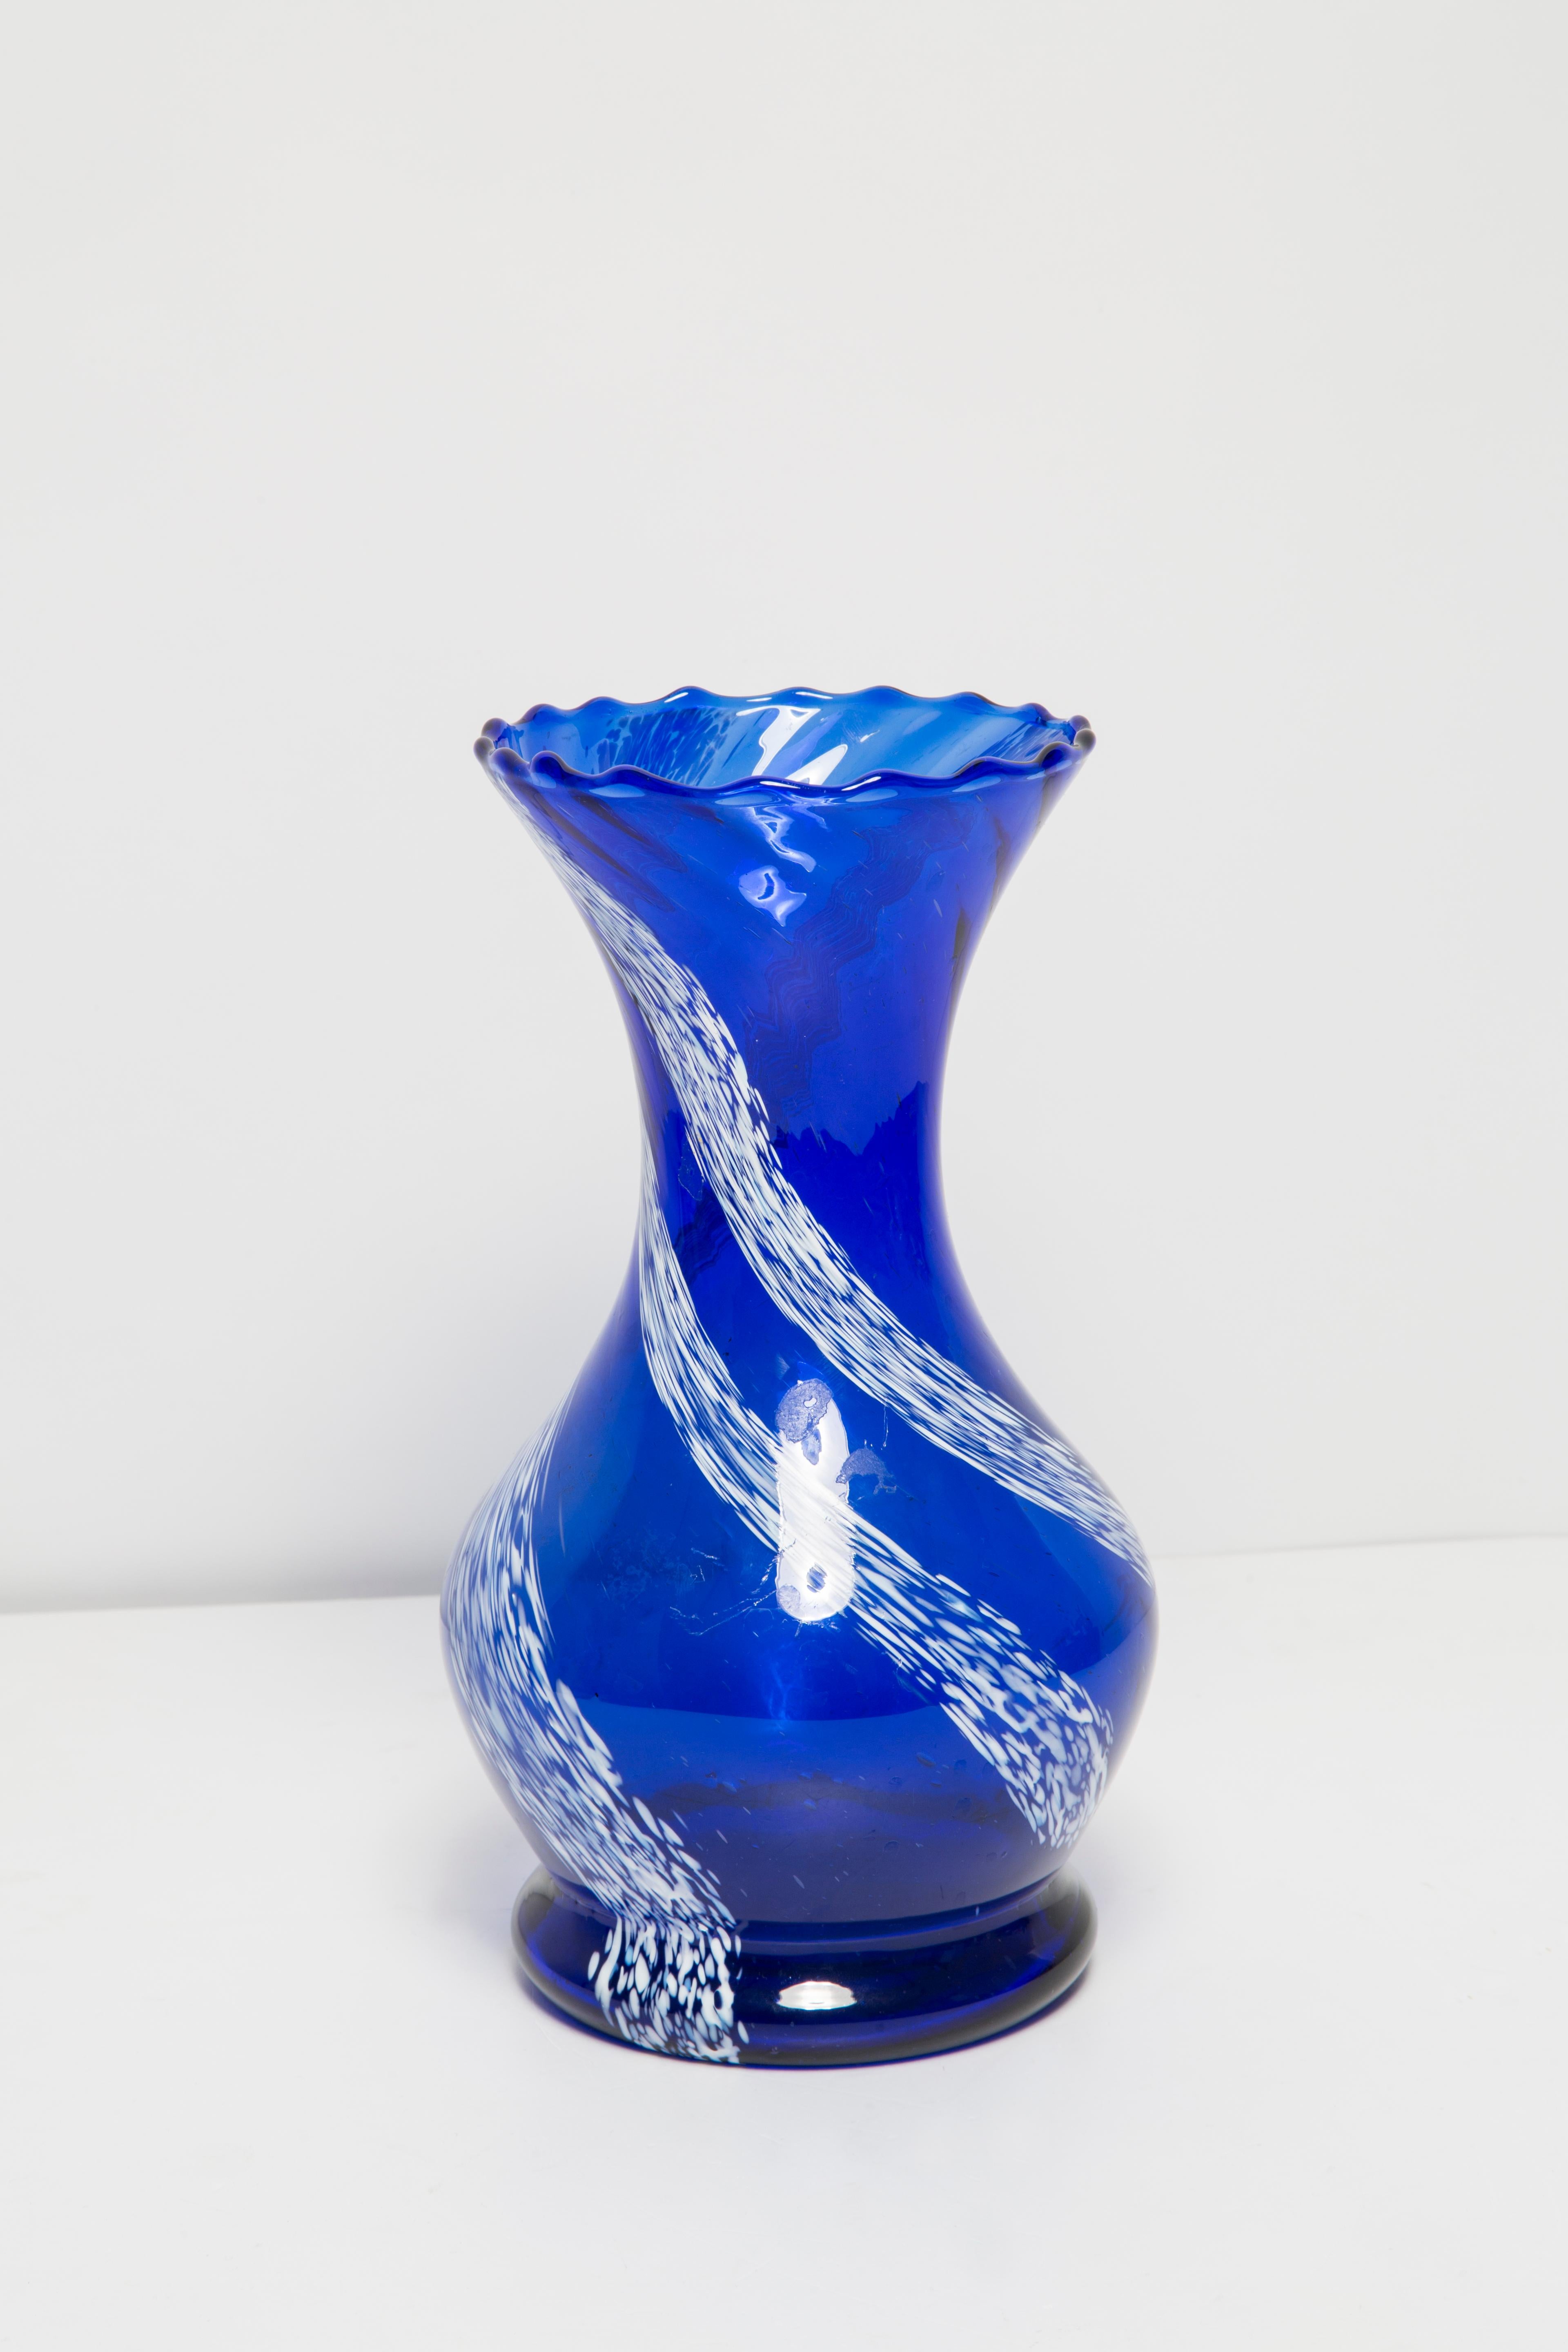 Mid Century Vintage Blue and White Artistic Glass Vase, Europe, 1970s For Sale 4